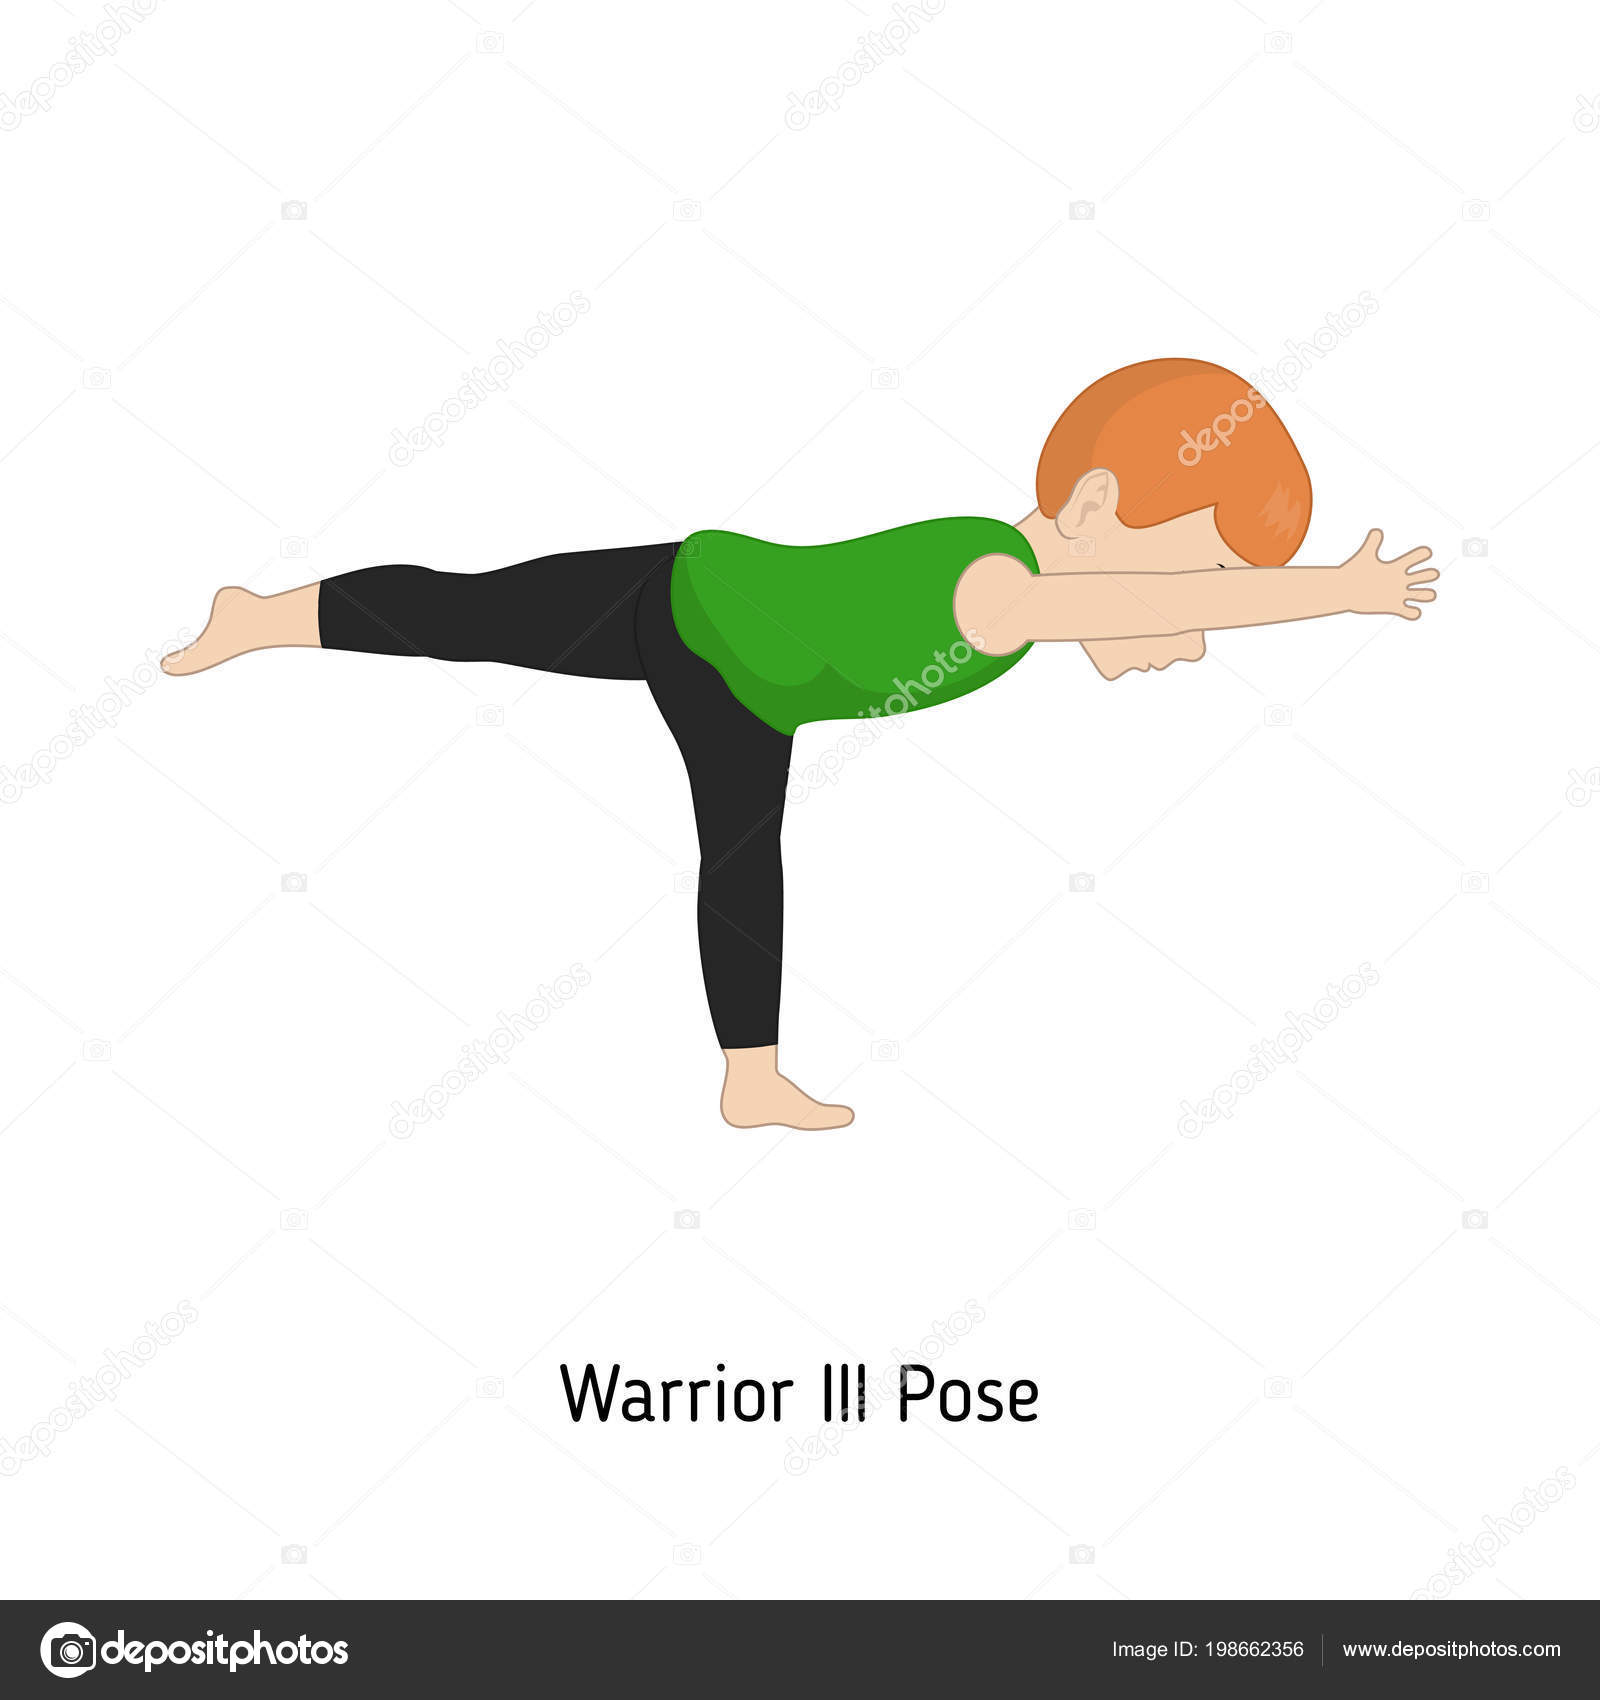 Warrior lll Pose with Yoga Blocks for Balance and Support